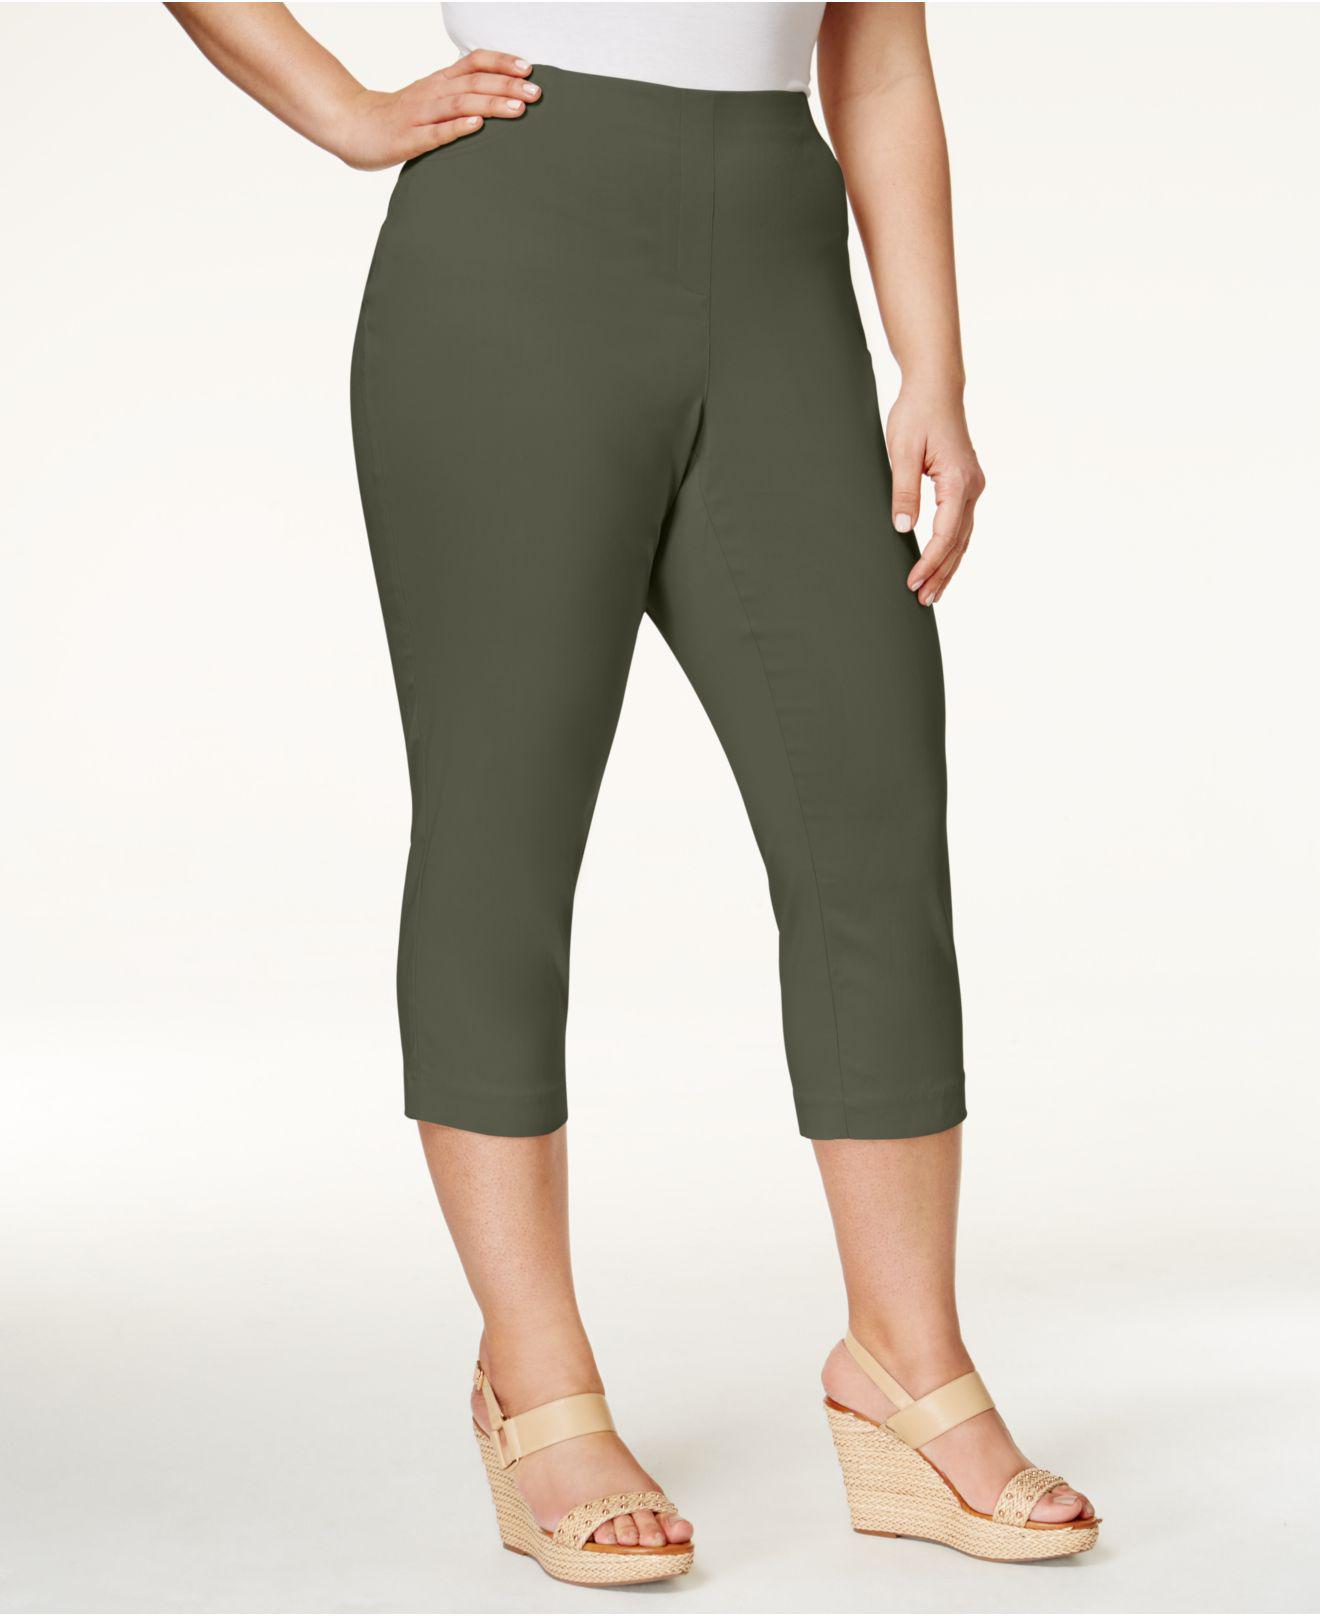 Lyst - Style & Co. Plus Size Capri Pants, Created For Macy's in Green